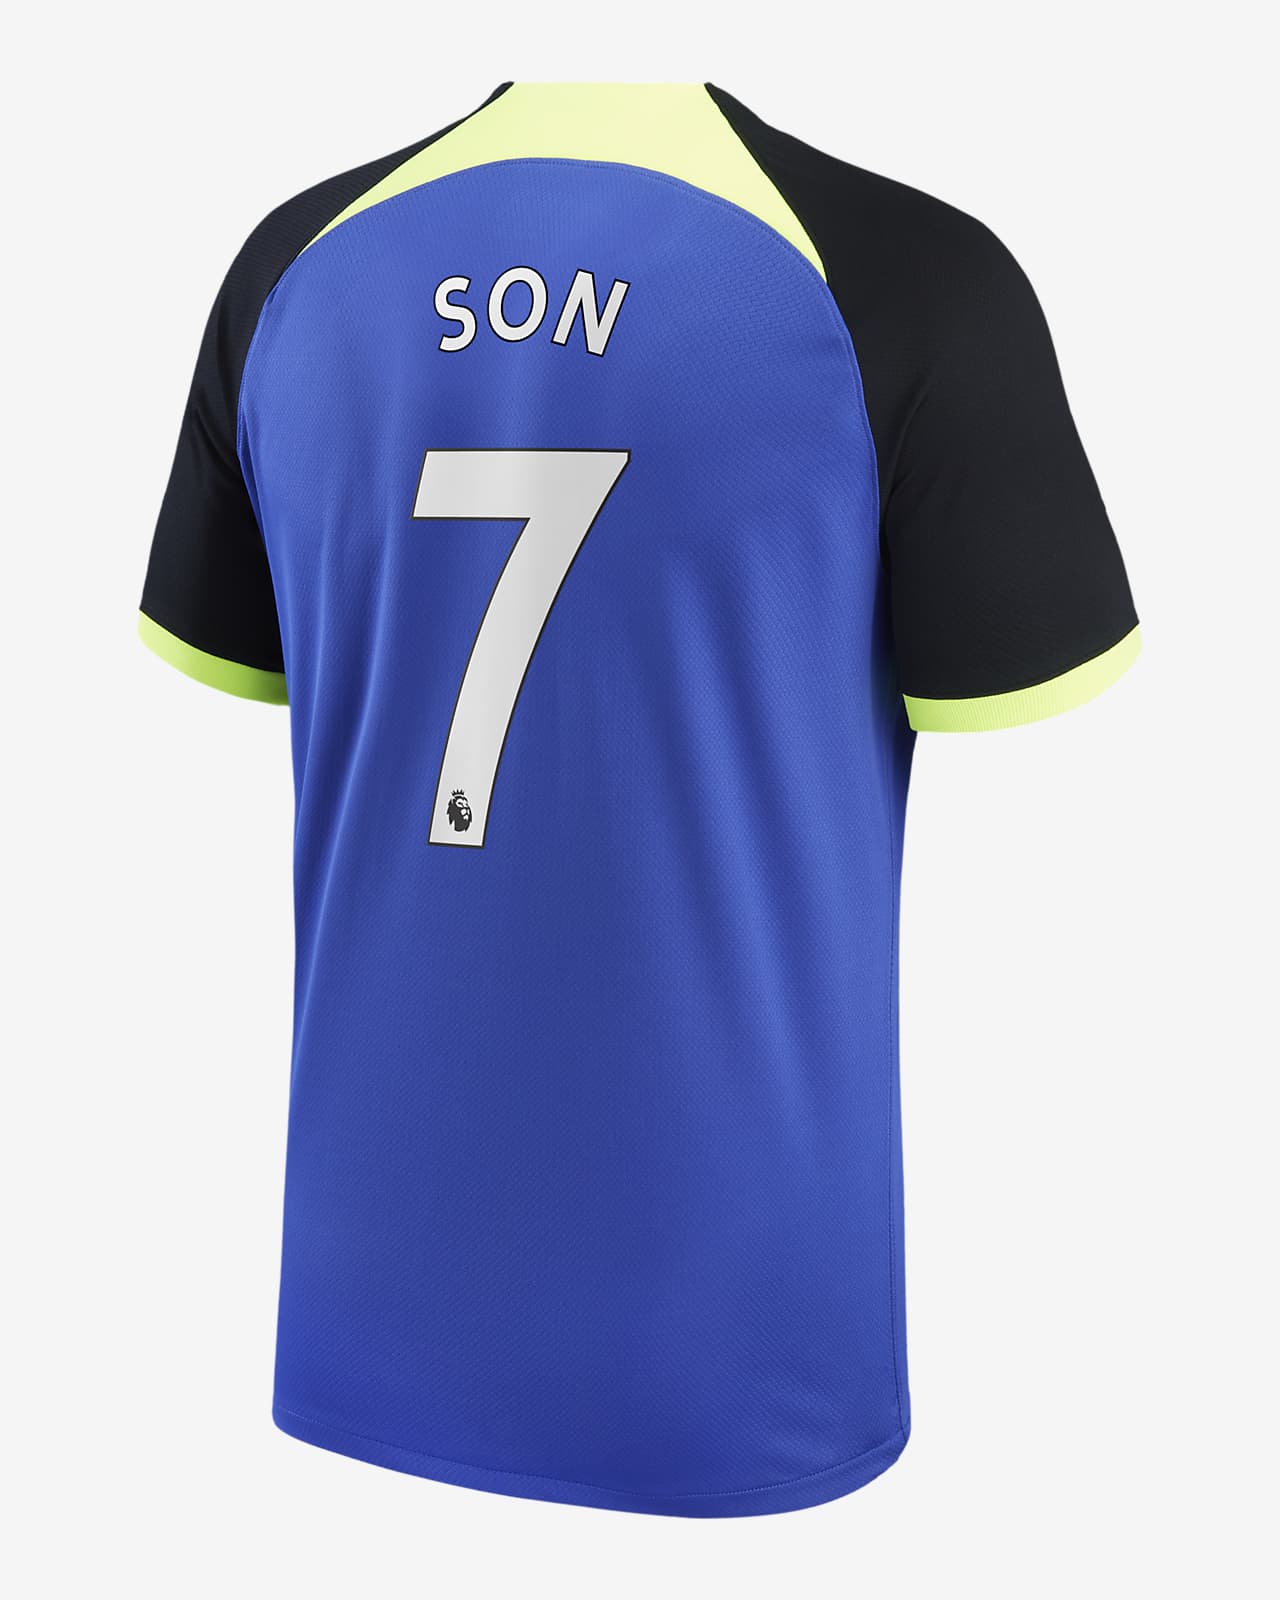 son soccer player jersey